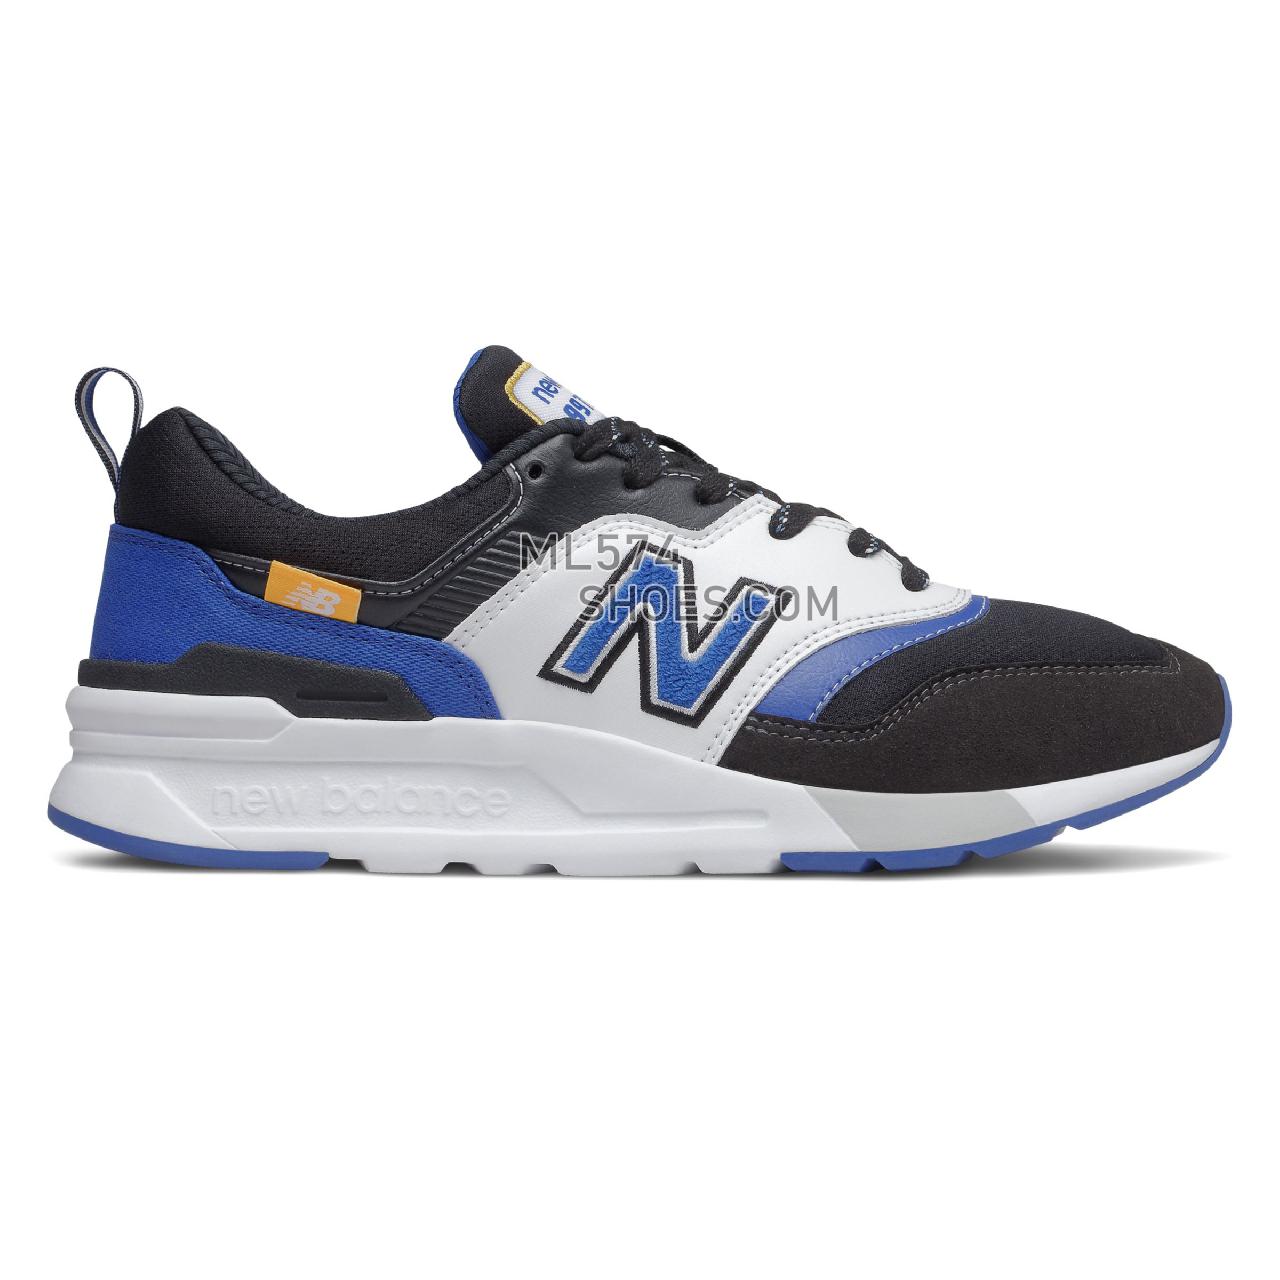 New Balance 997H - Men's Sport Style Sneakers - Black with Team Royal - CM997HEV